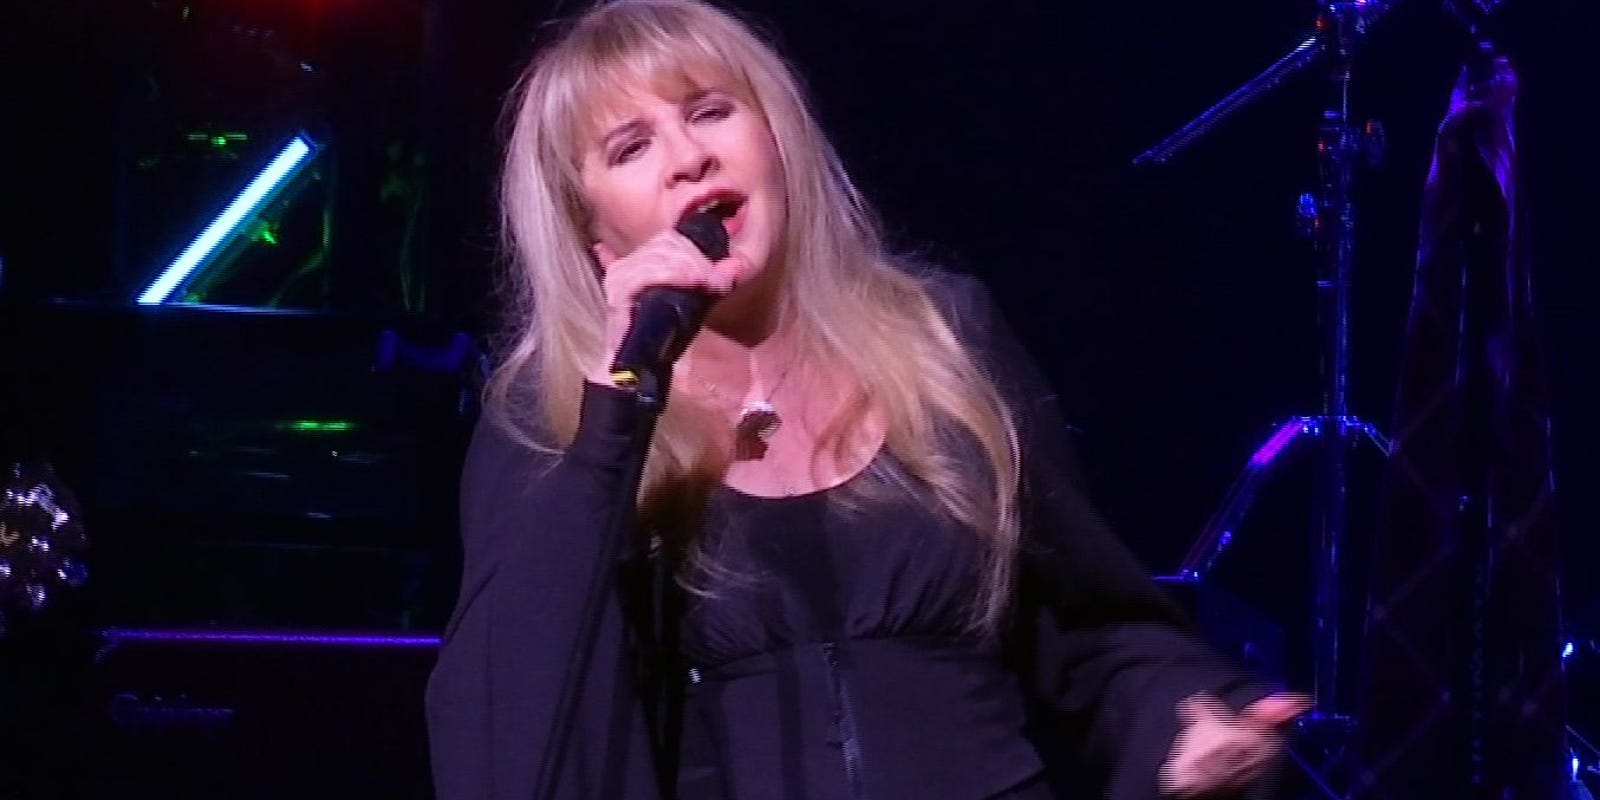 stevie nicks working on "Rhiannon" book and movie